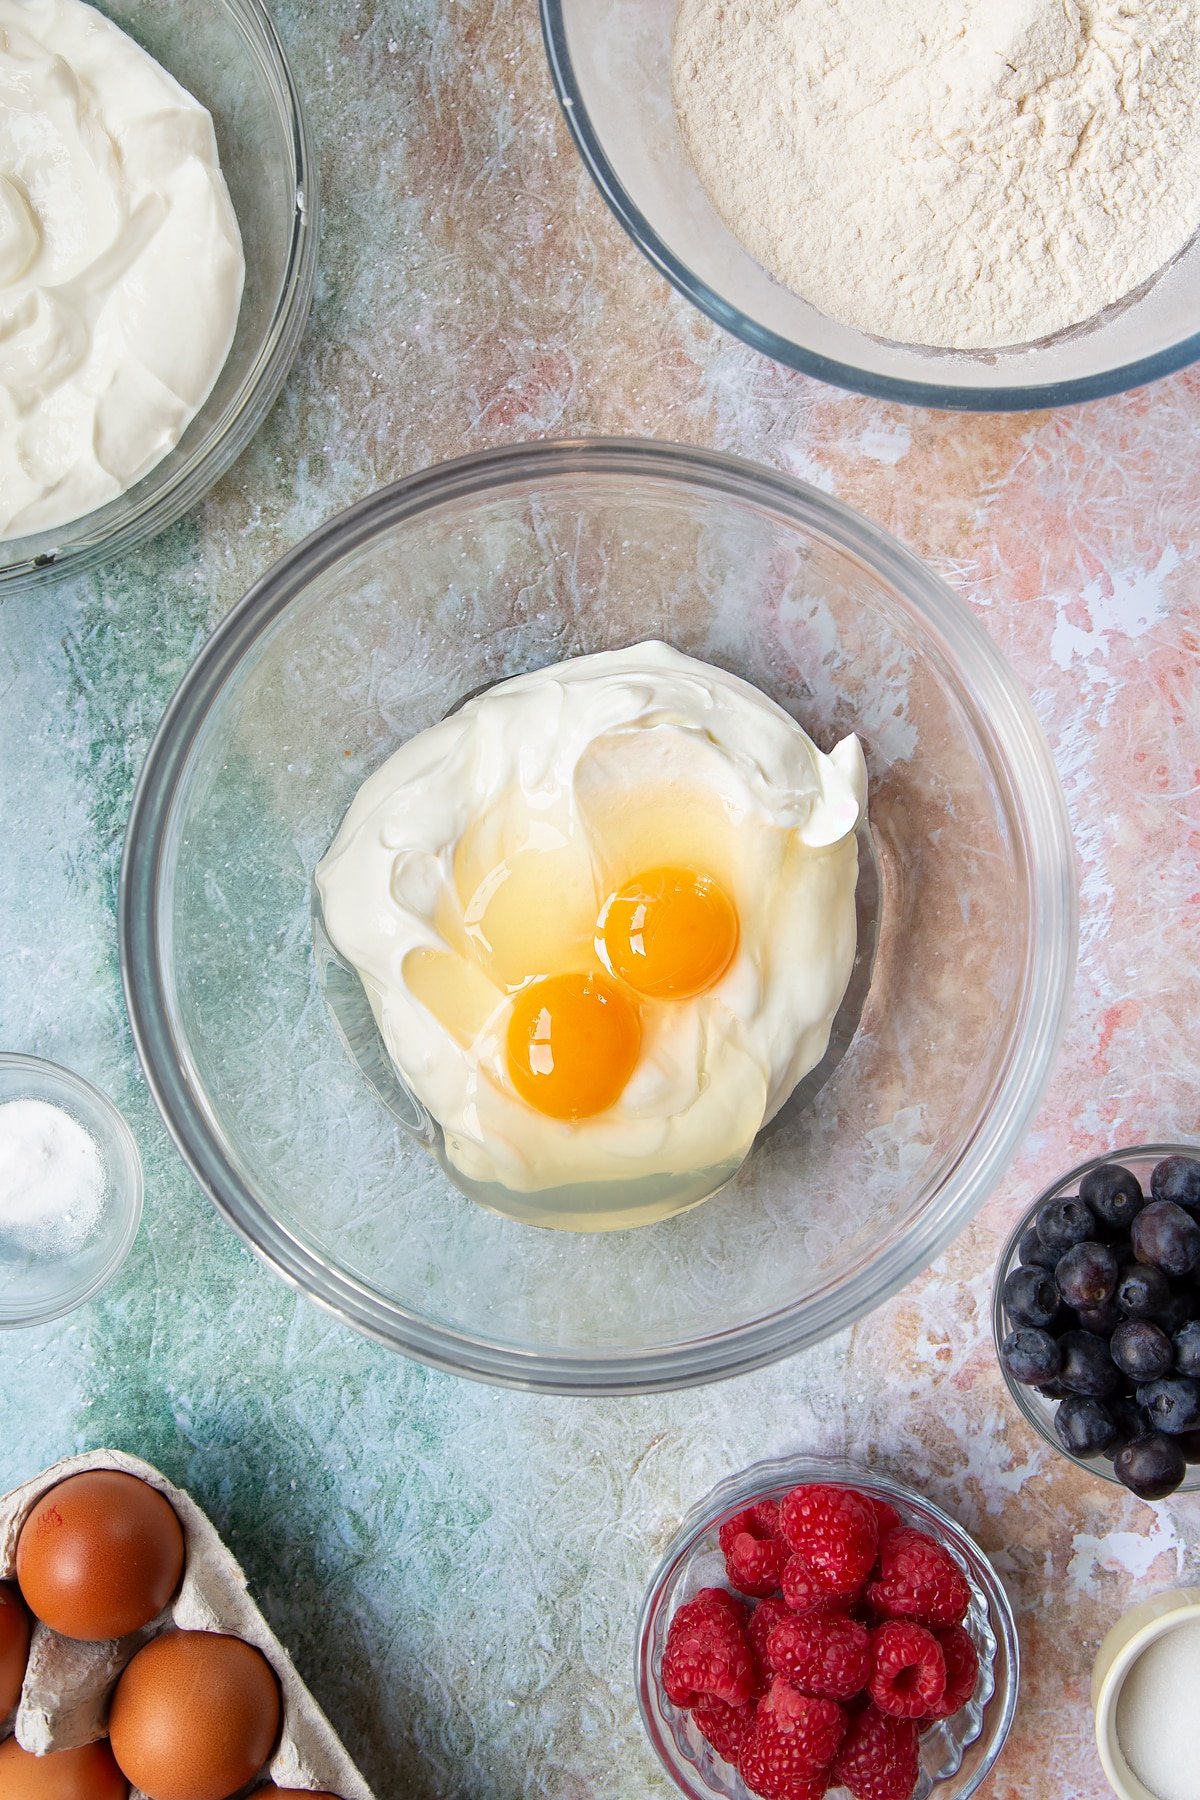 Eggs and skyr in a mixing bowl. Berries and ingredients to make skyr pancakes surround the bowl.